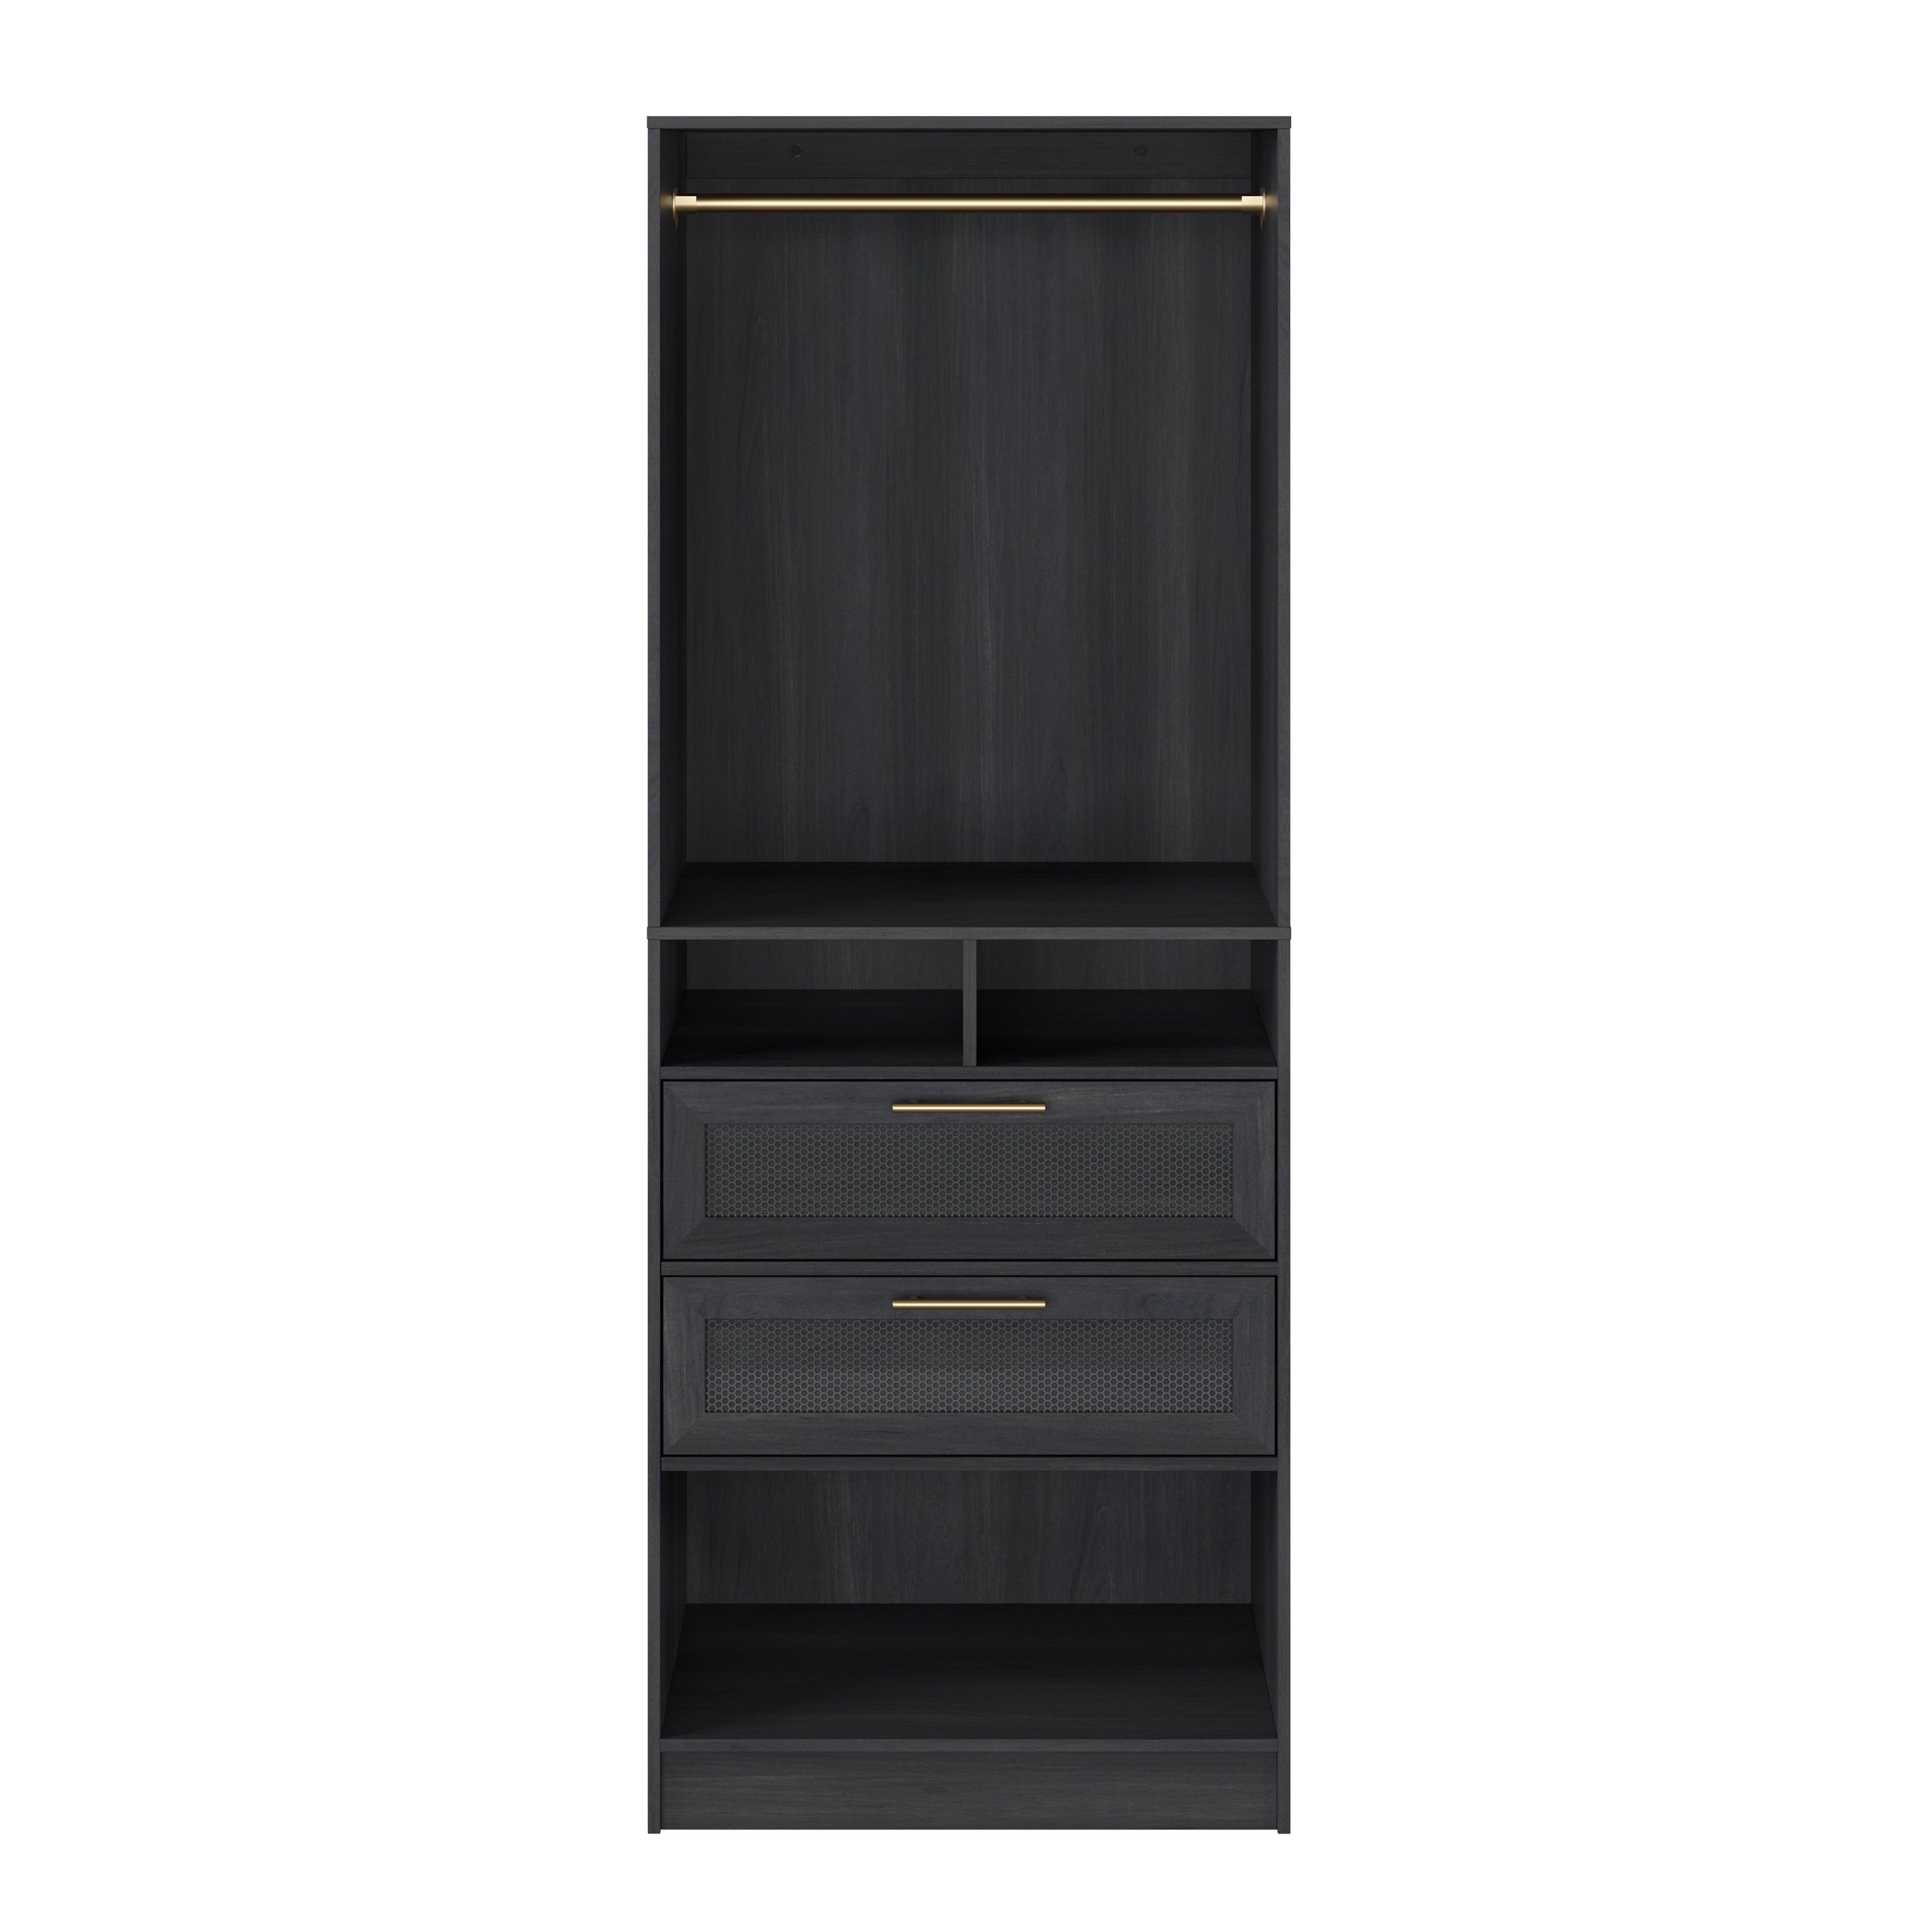 Scott Living Robin 30" Wardrobe Closet With 2 Drawers And 4 Shelves With  Clothes Rod Closet System & Reviews | Wayfair For 2 Separable Wardrobes (View 6 of 15)